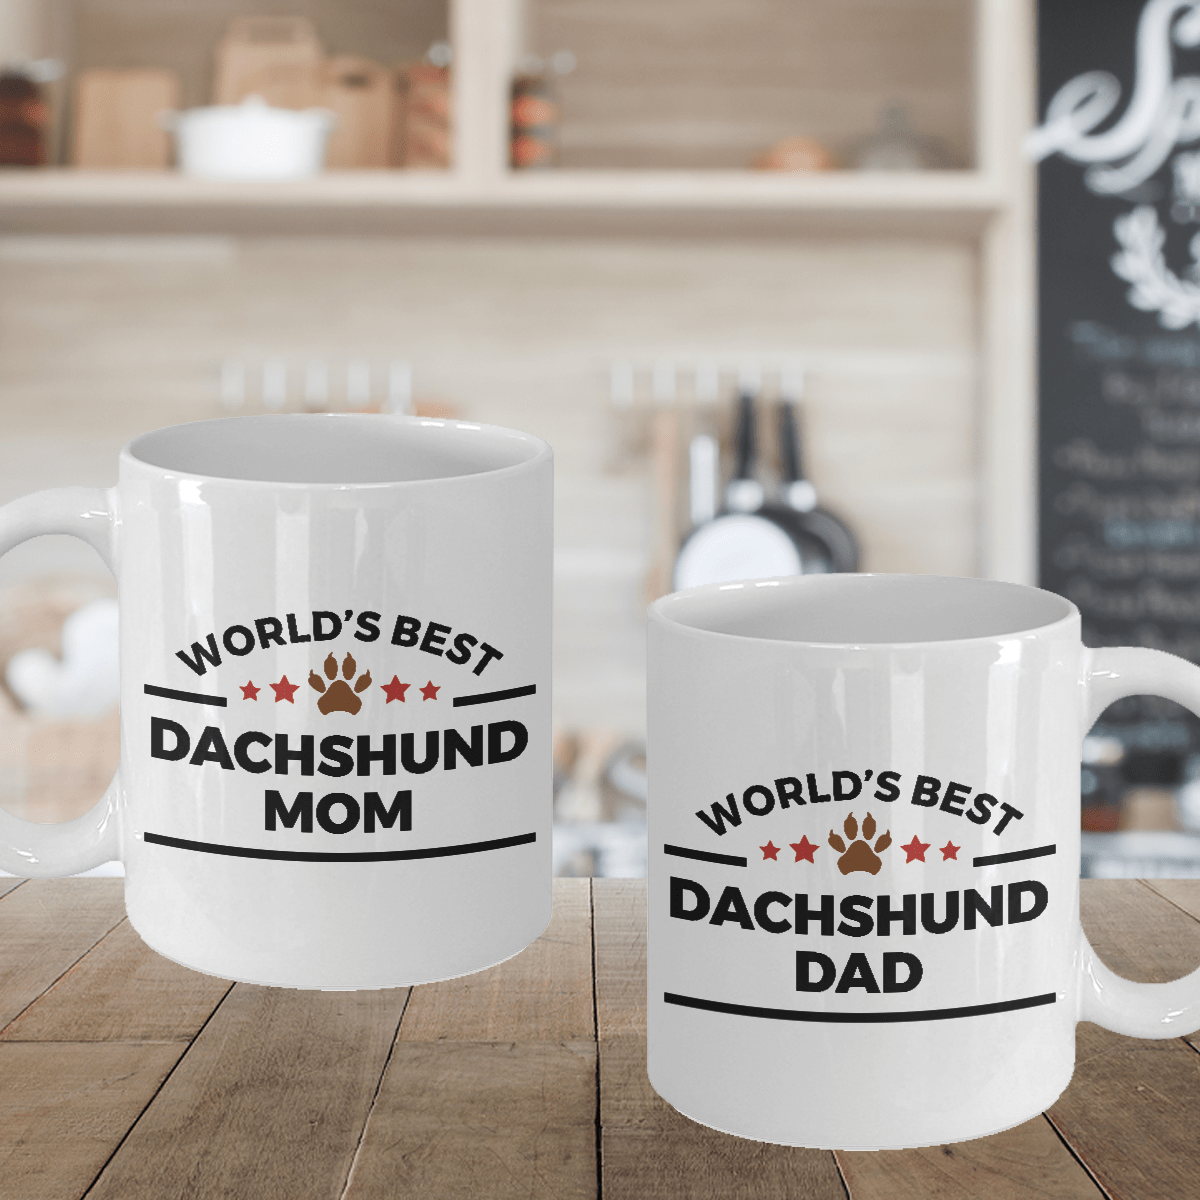 World's Best Dachshund Dad and Mom Couple Ceramic Mug - Set of 2 His and Hers